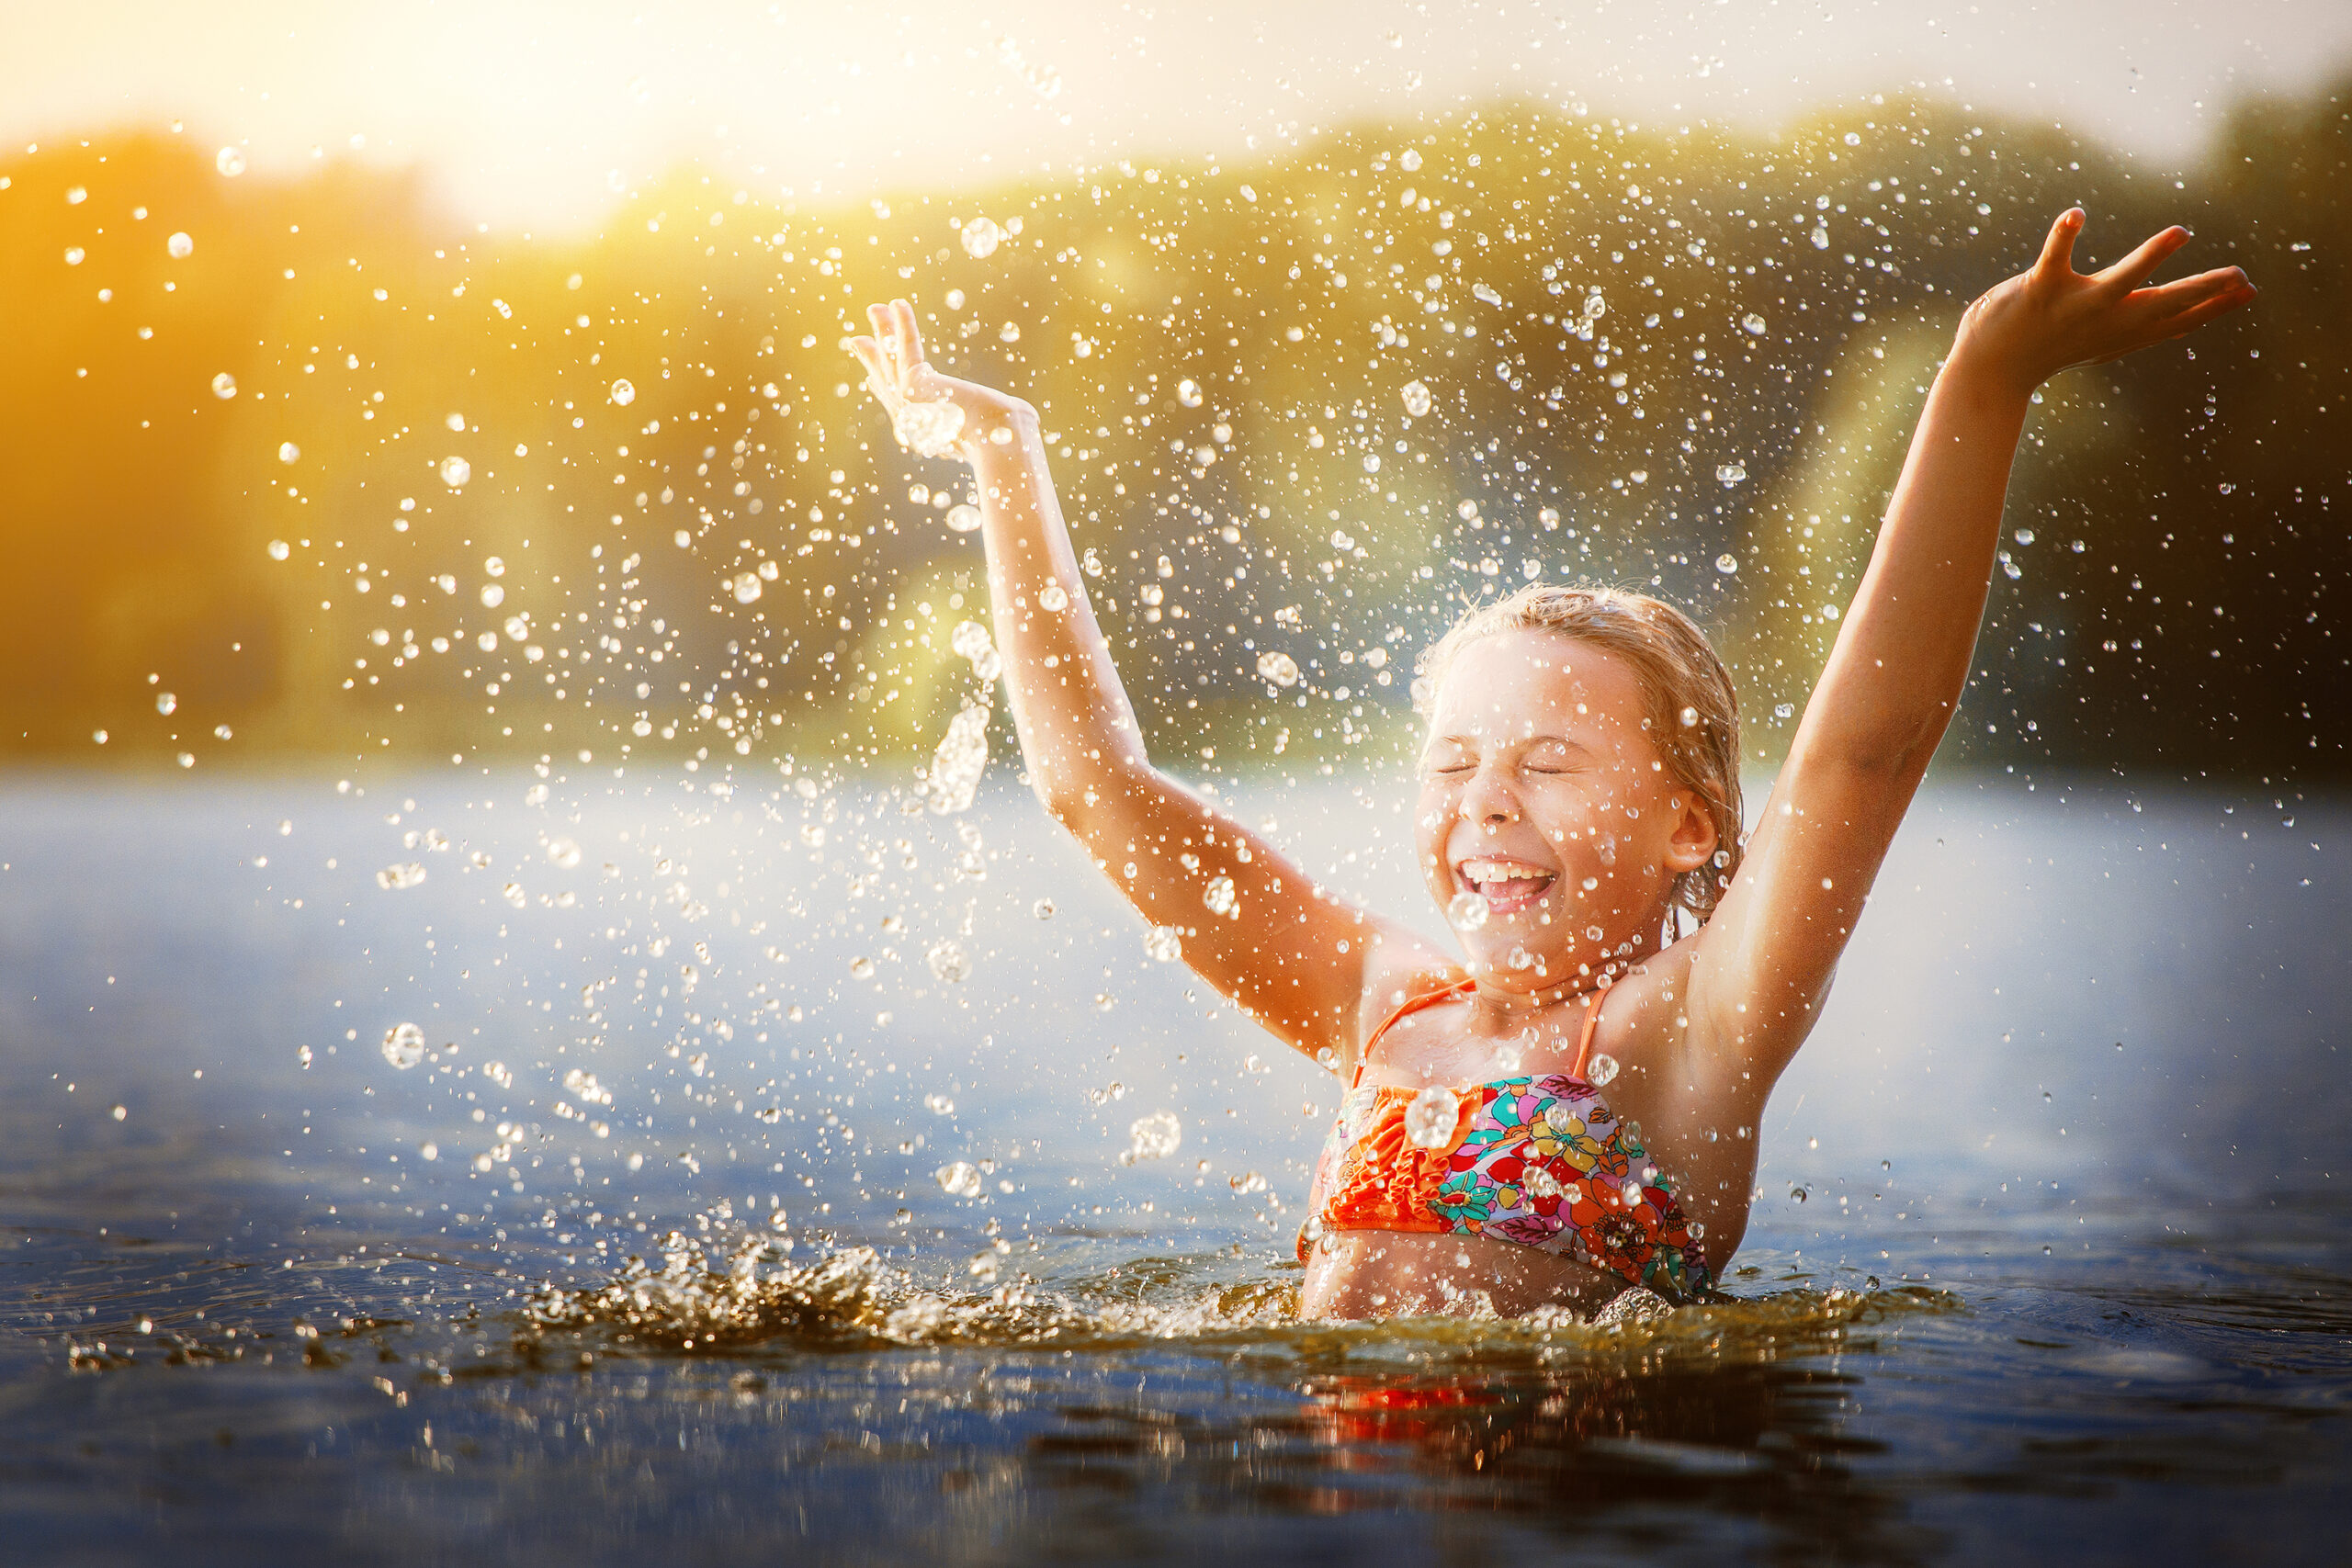 A girl with blond hair playing in the river, she raises her hands up in the water and splashes water drops